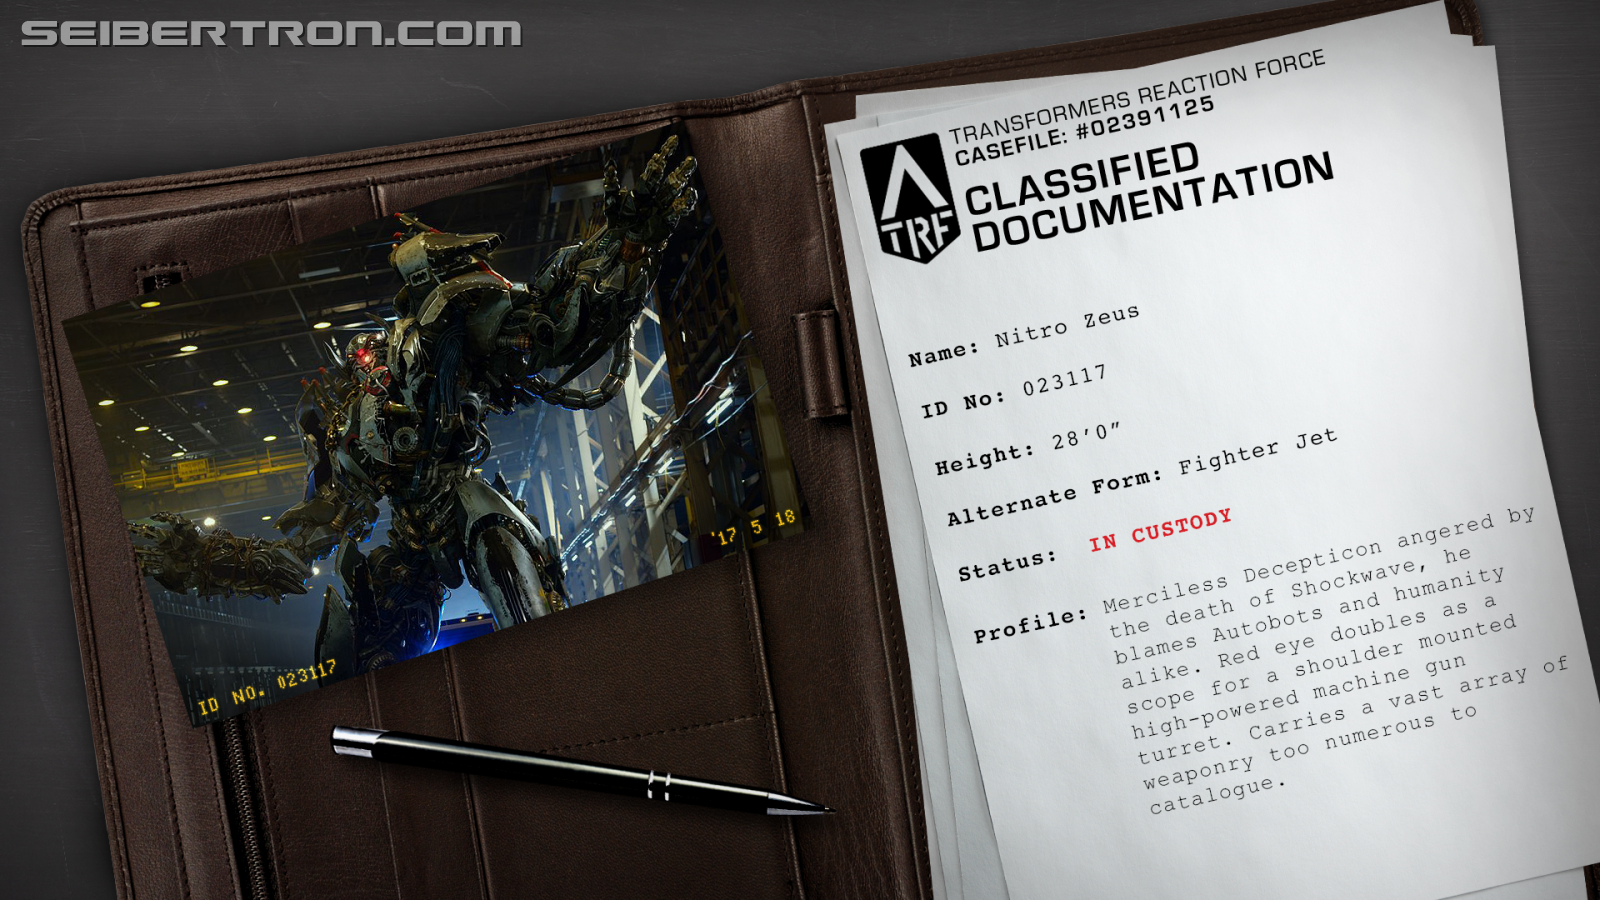 Transformers News: 6 More Exclusive Decepticon Casefiles Roundup with the Best Look Yet at Mowhawk, Deadbot and Others